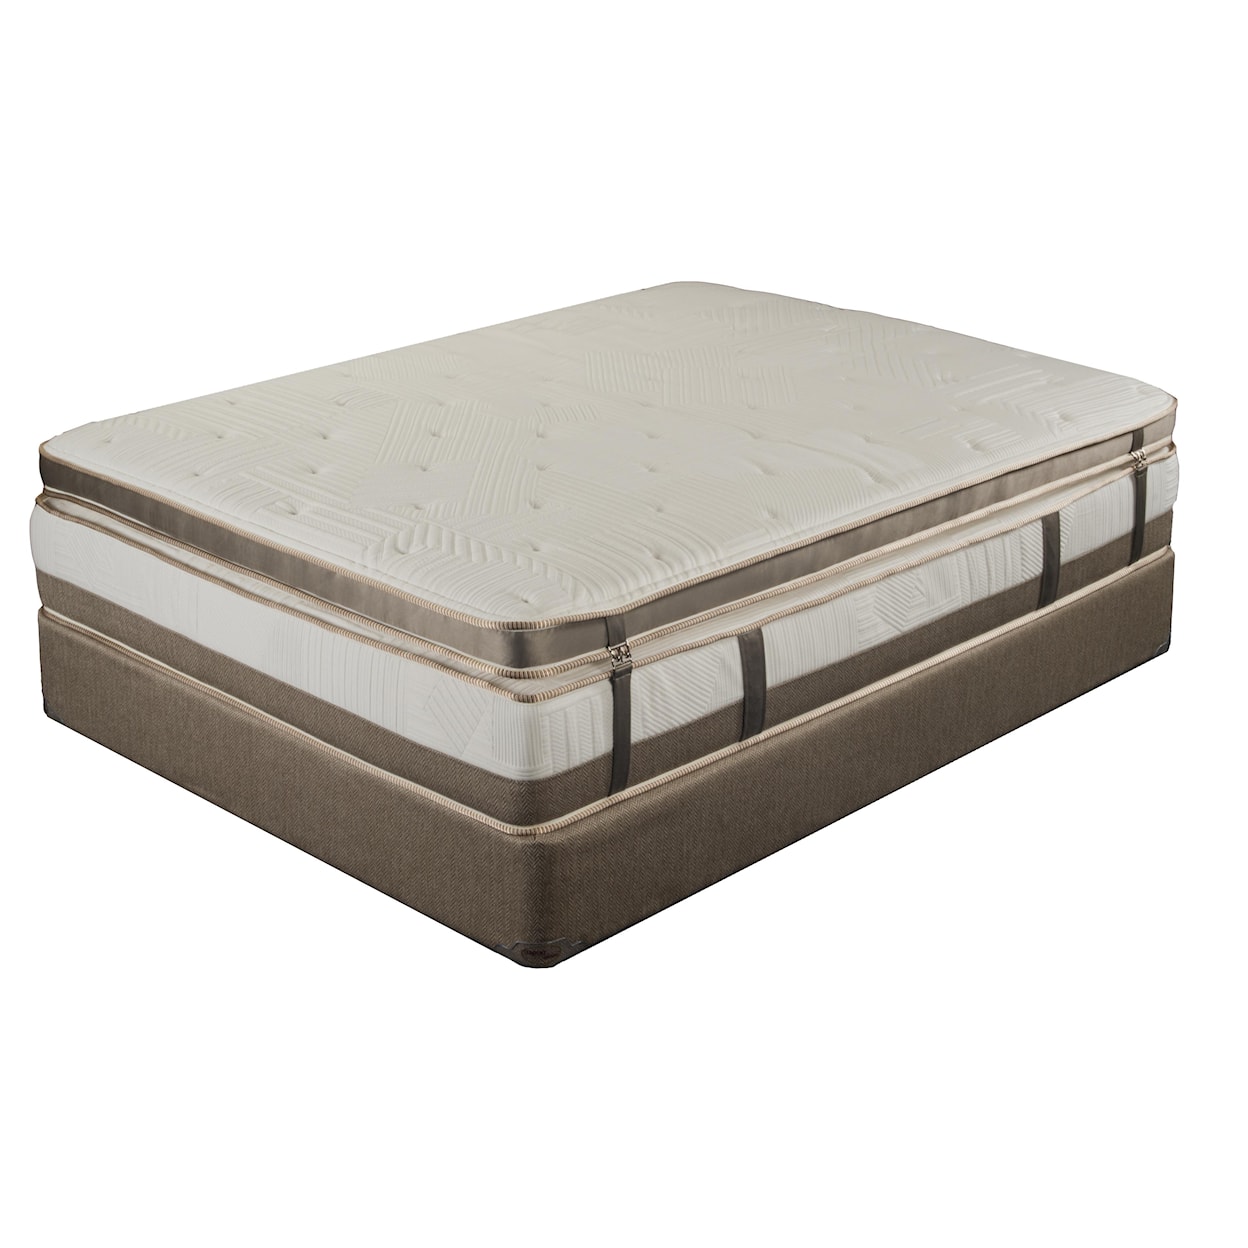 King Koil Extended Life 3300 Full Mattress Set with Removable Top Layer